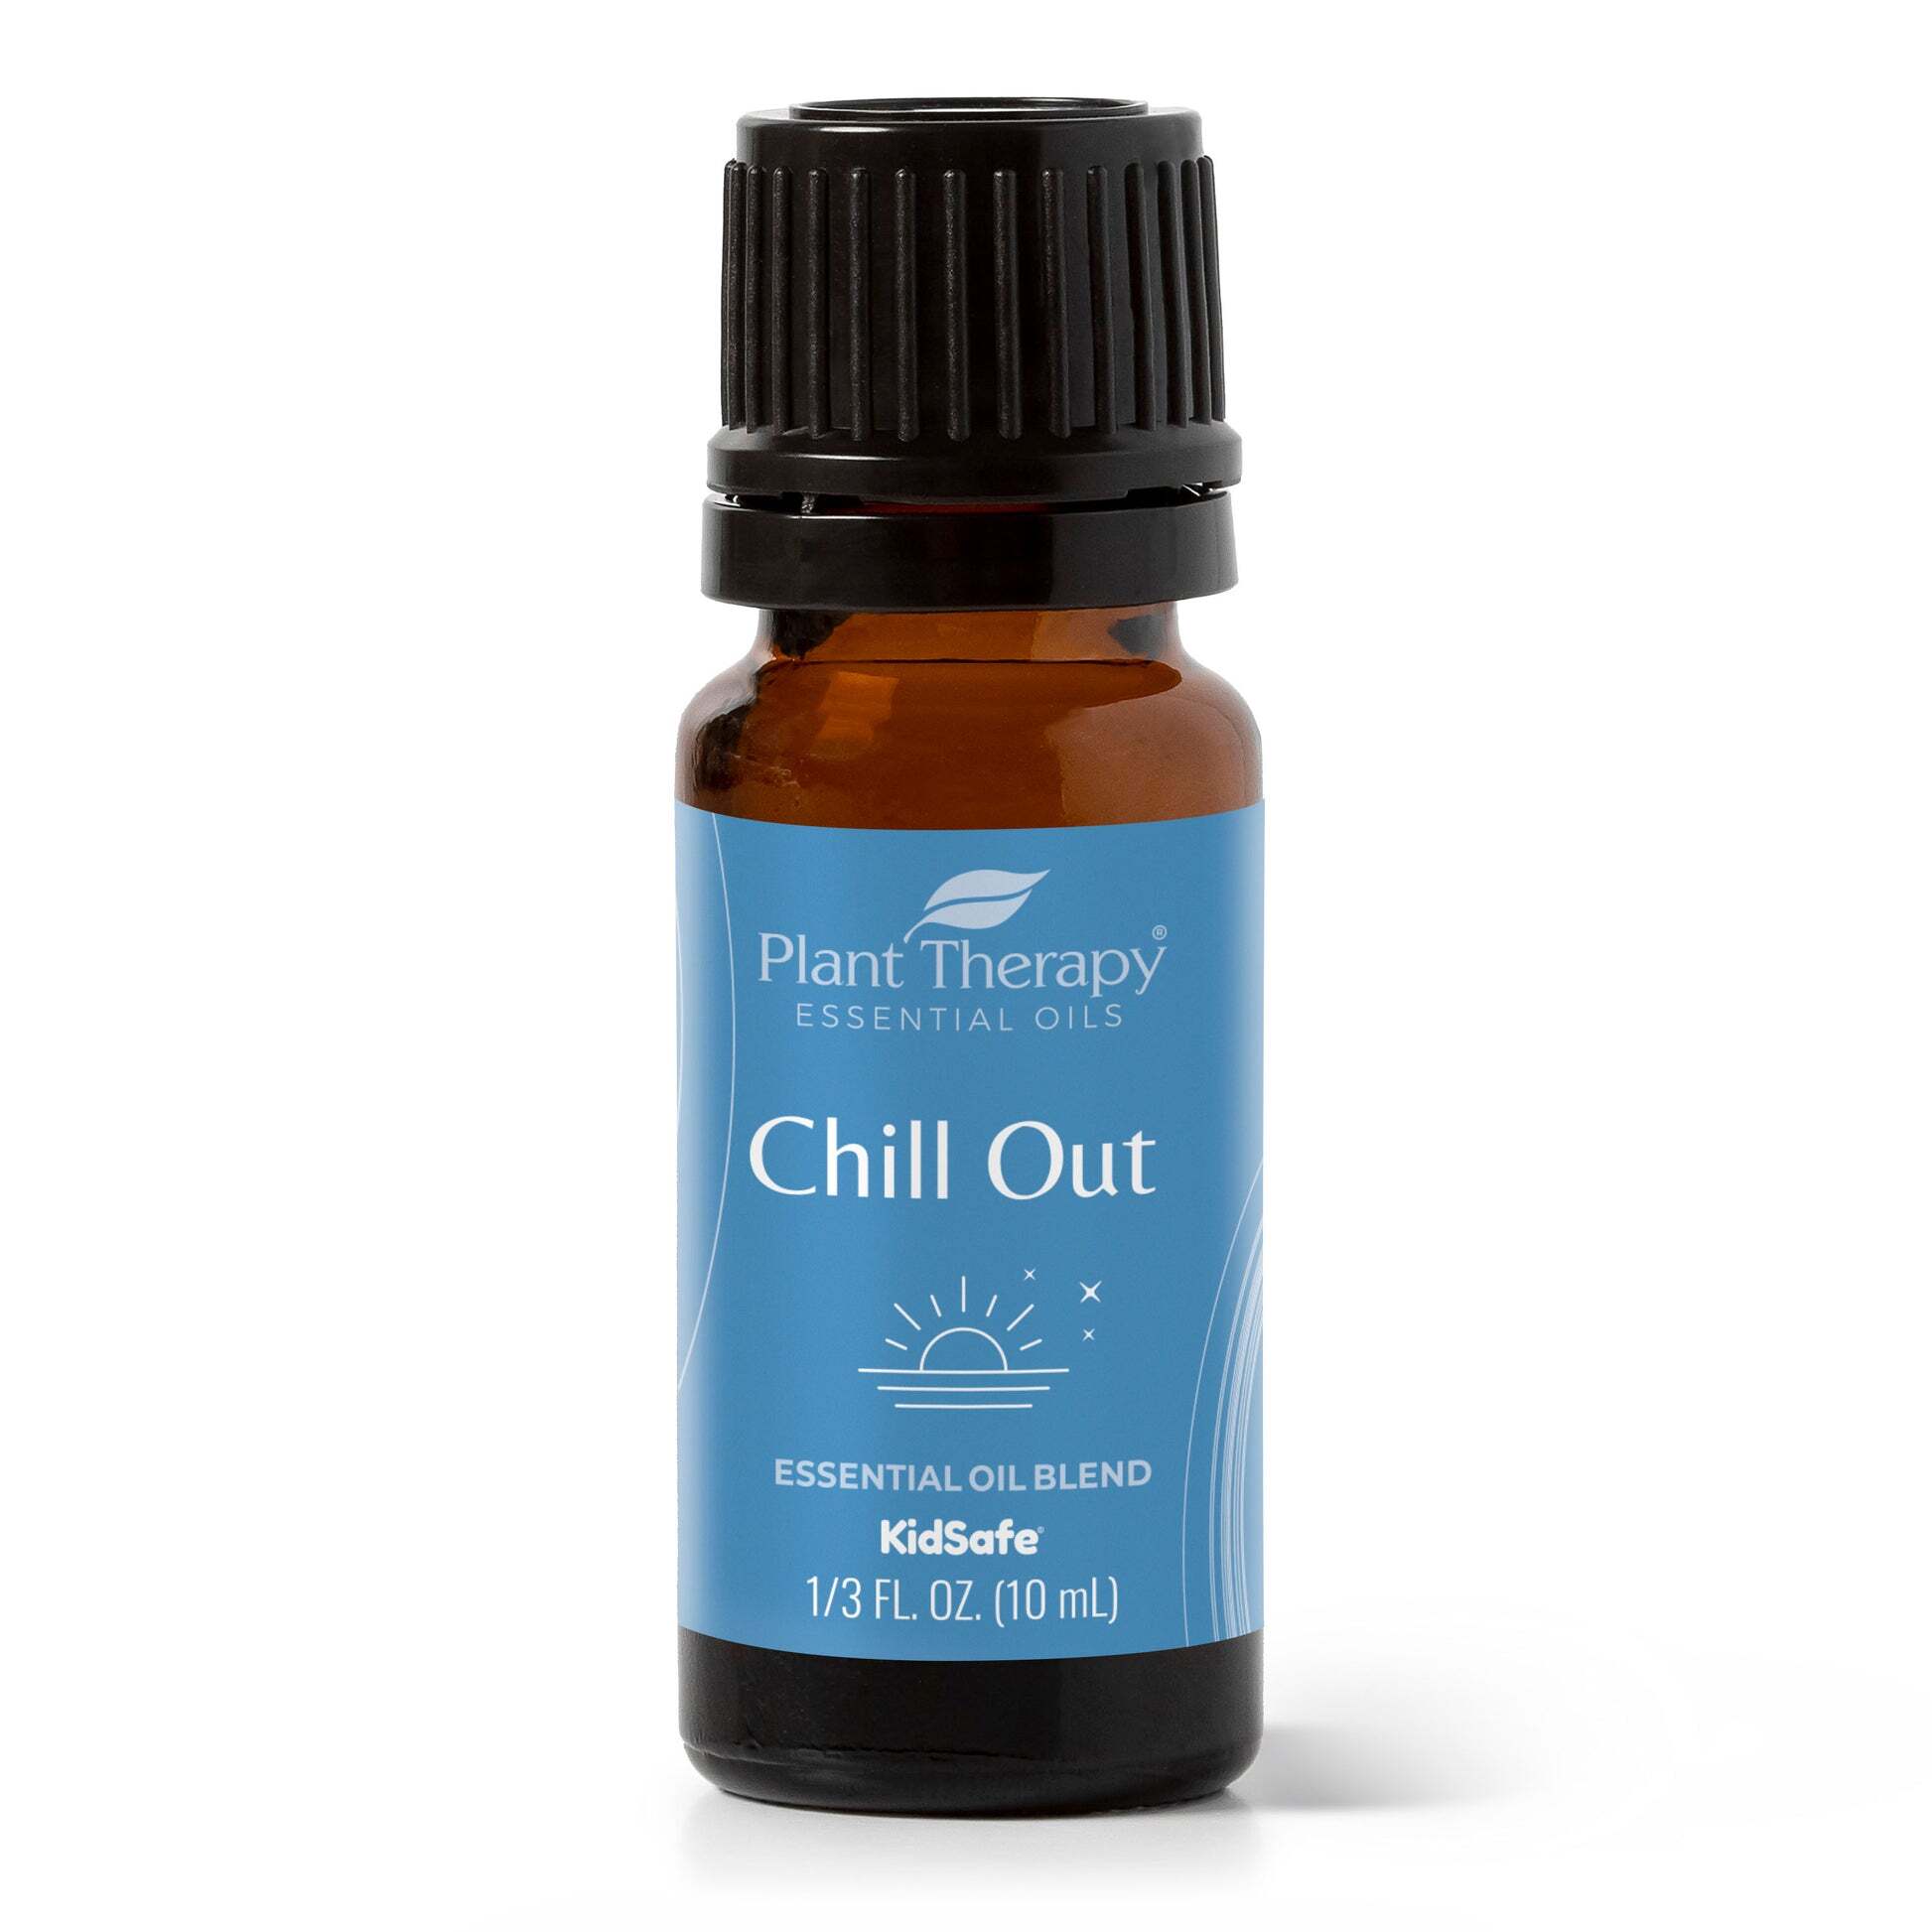 chill_out-10ml-01_1946x